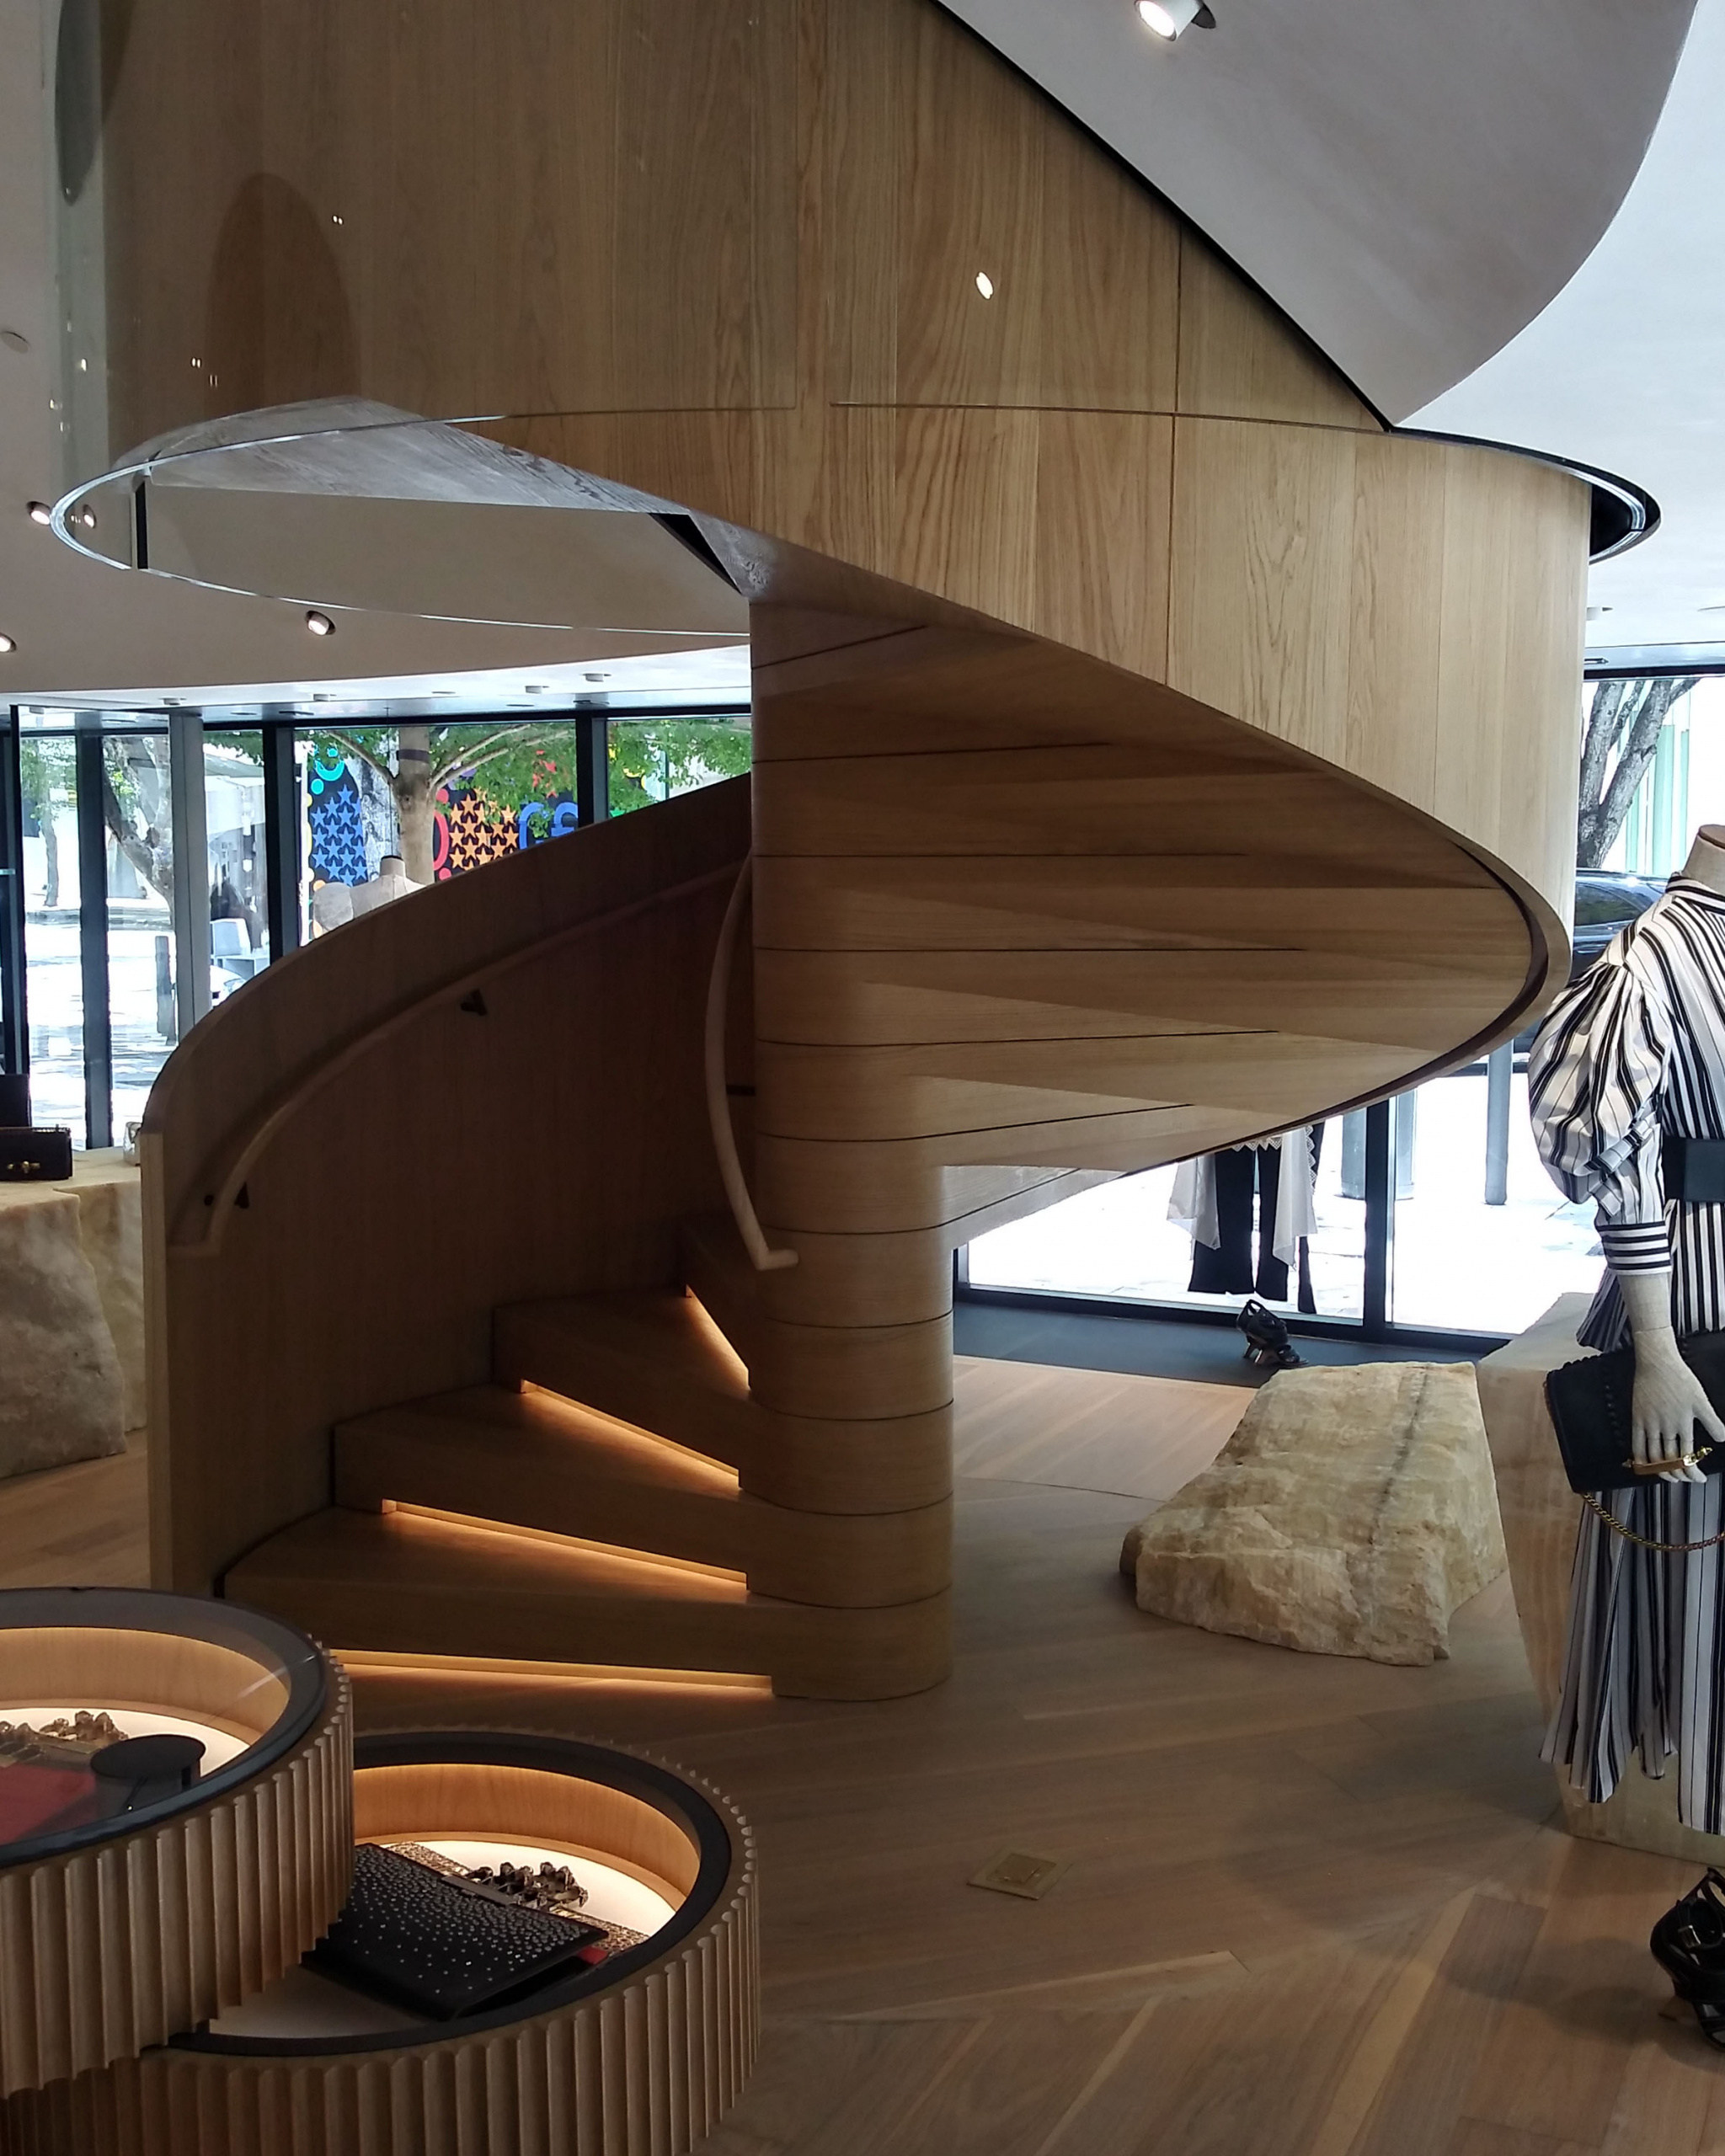 Best in Show - Spiral Stairway by Parks and Sons